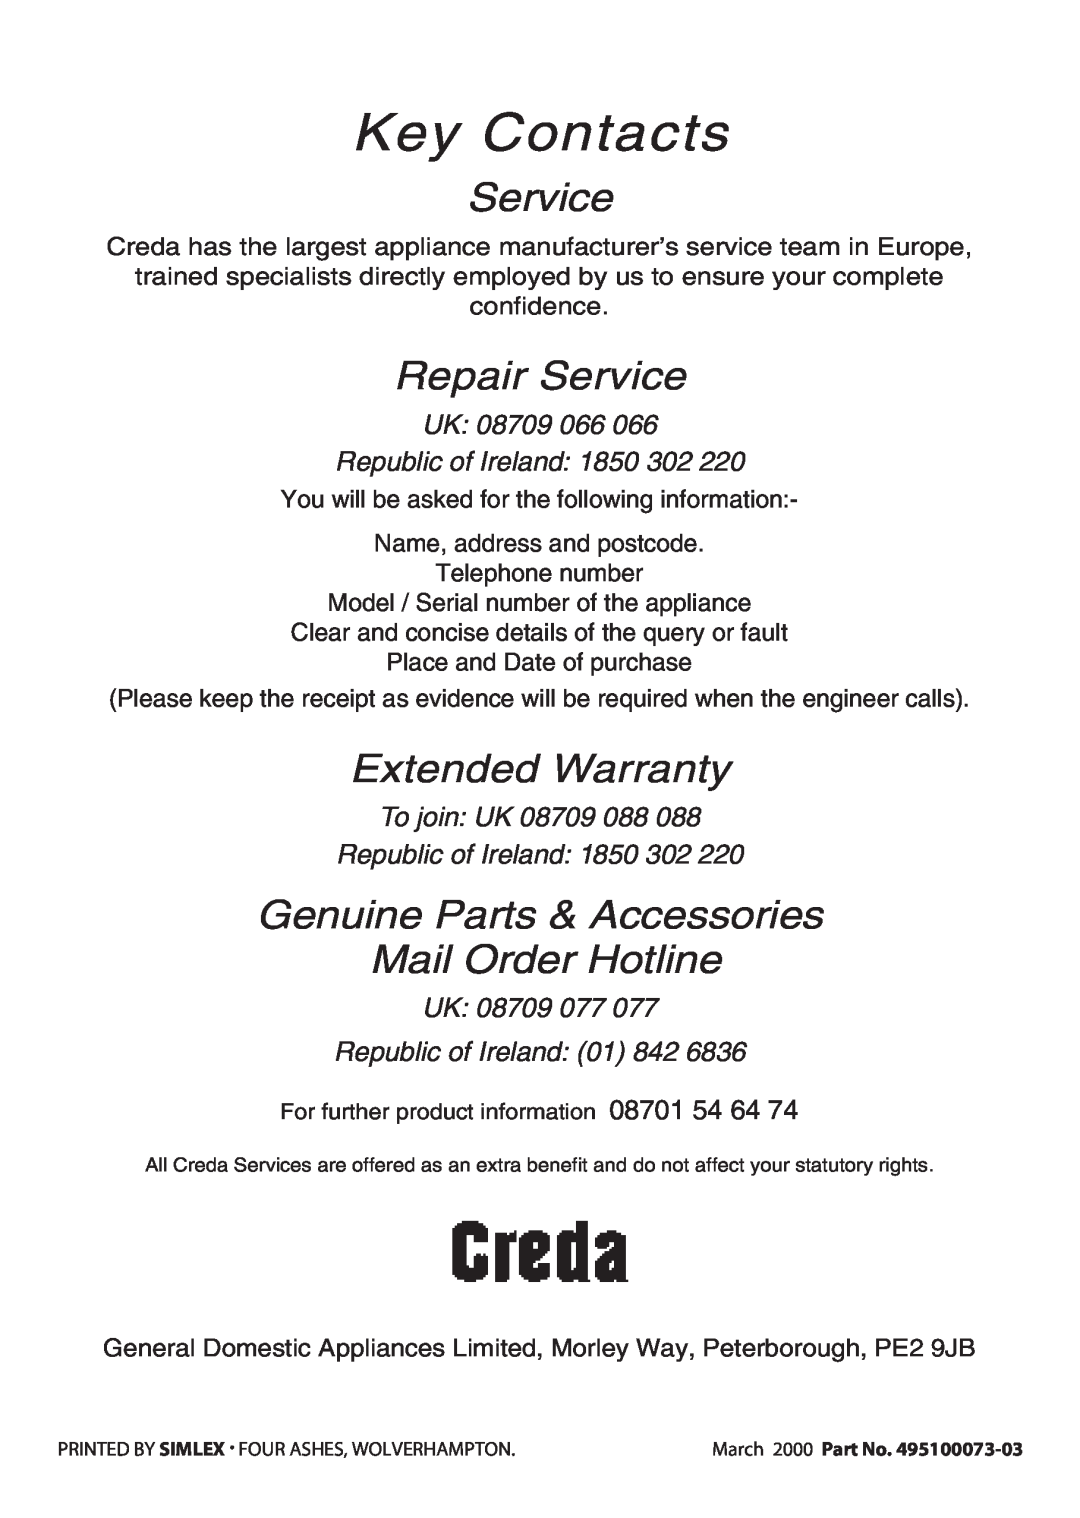 Creda H250E manual Key Contacts, Repair Service, Extended Warranty, Genuine Parts & Accessories Mail Order Hotline 